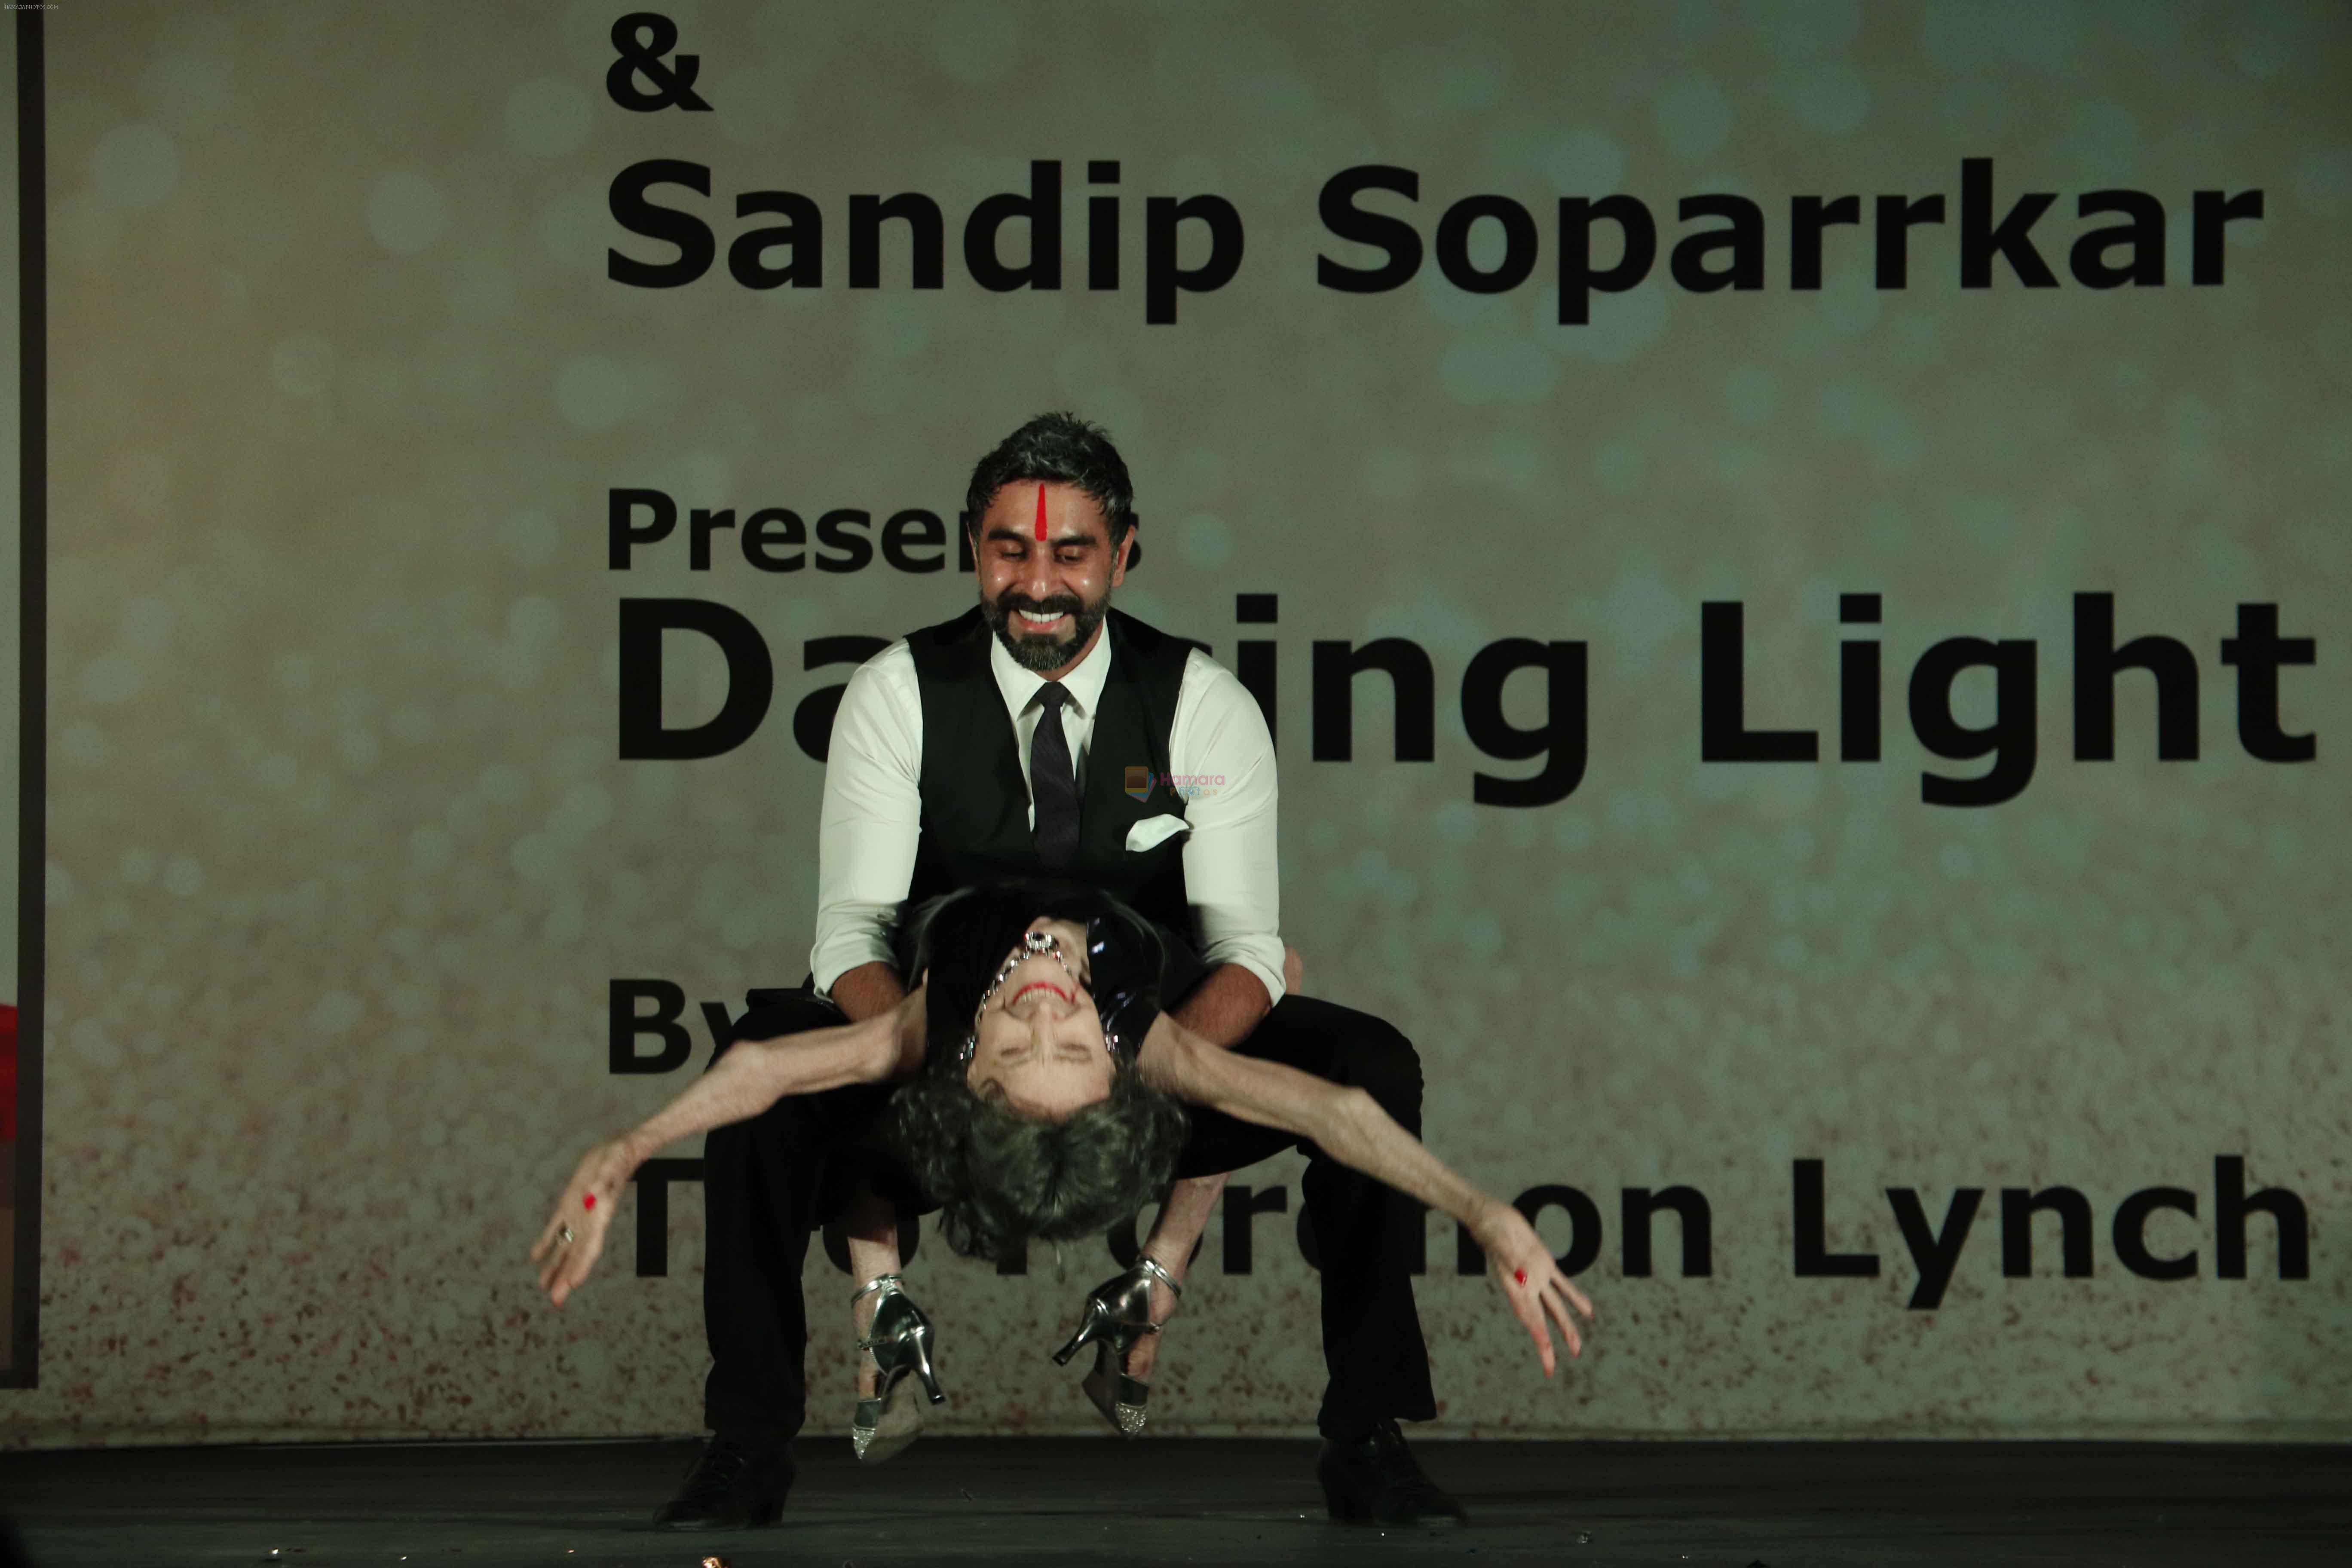 Sandip Soparrkar with Tao Porchon Lynch at the launch of Dancing Light autobiography of Ms Tao Porchon-Lynch on 26th Dec 2015